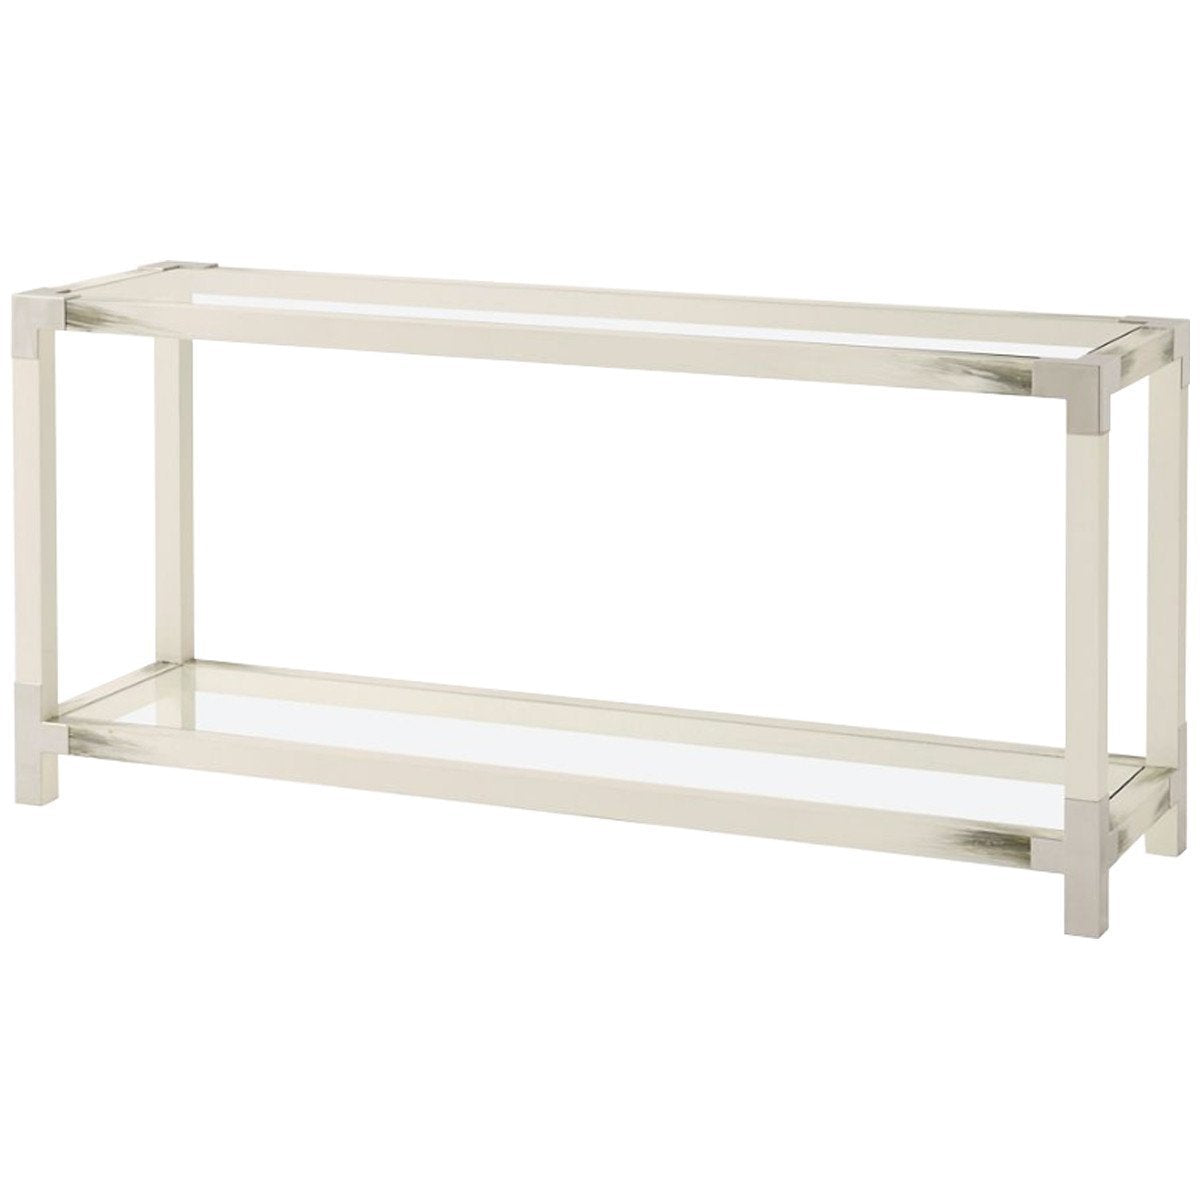 Theodore Alexander Cutting Edge Longhorn White Console Table